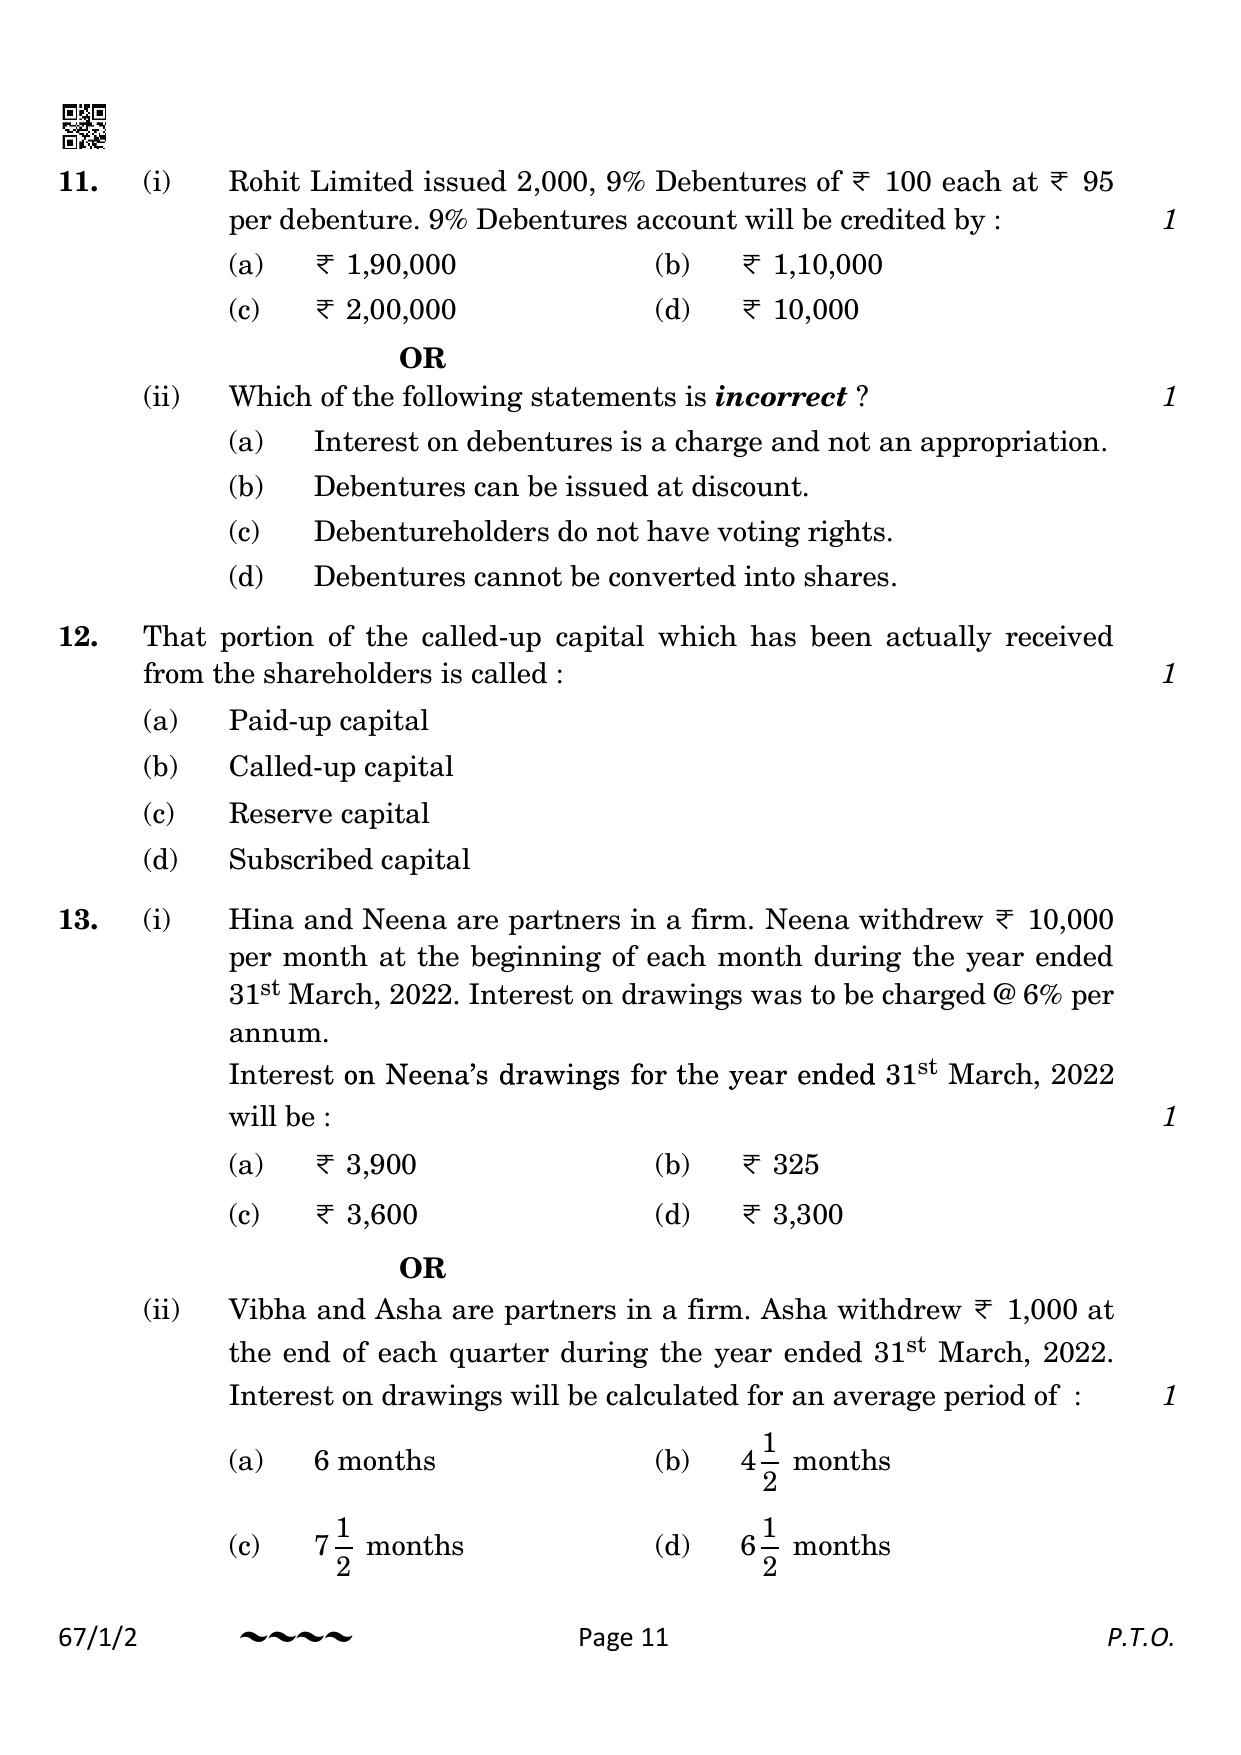 CBSE Class 12 67-1-2 Accountancy 2023 Question Paper - Page 11